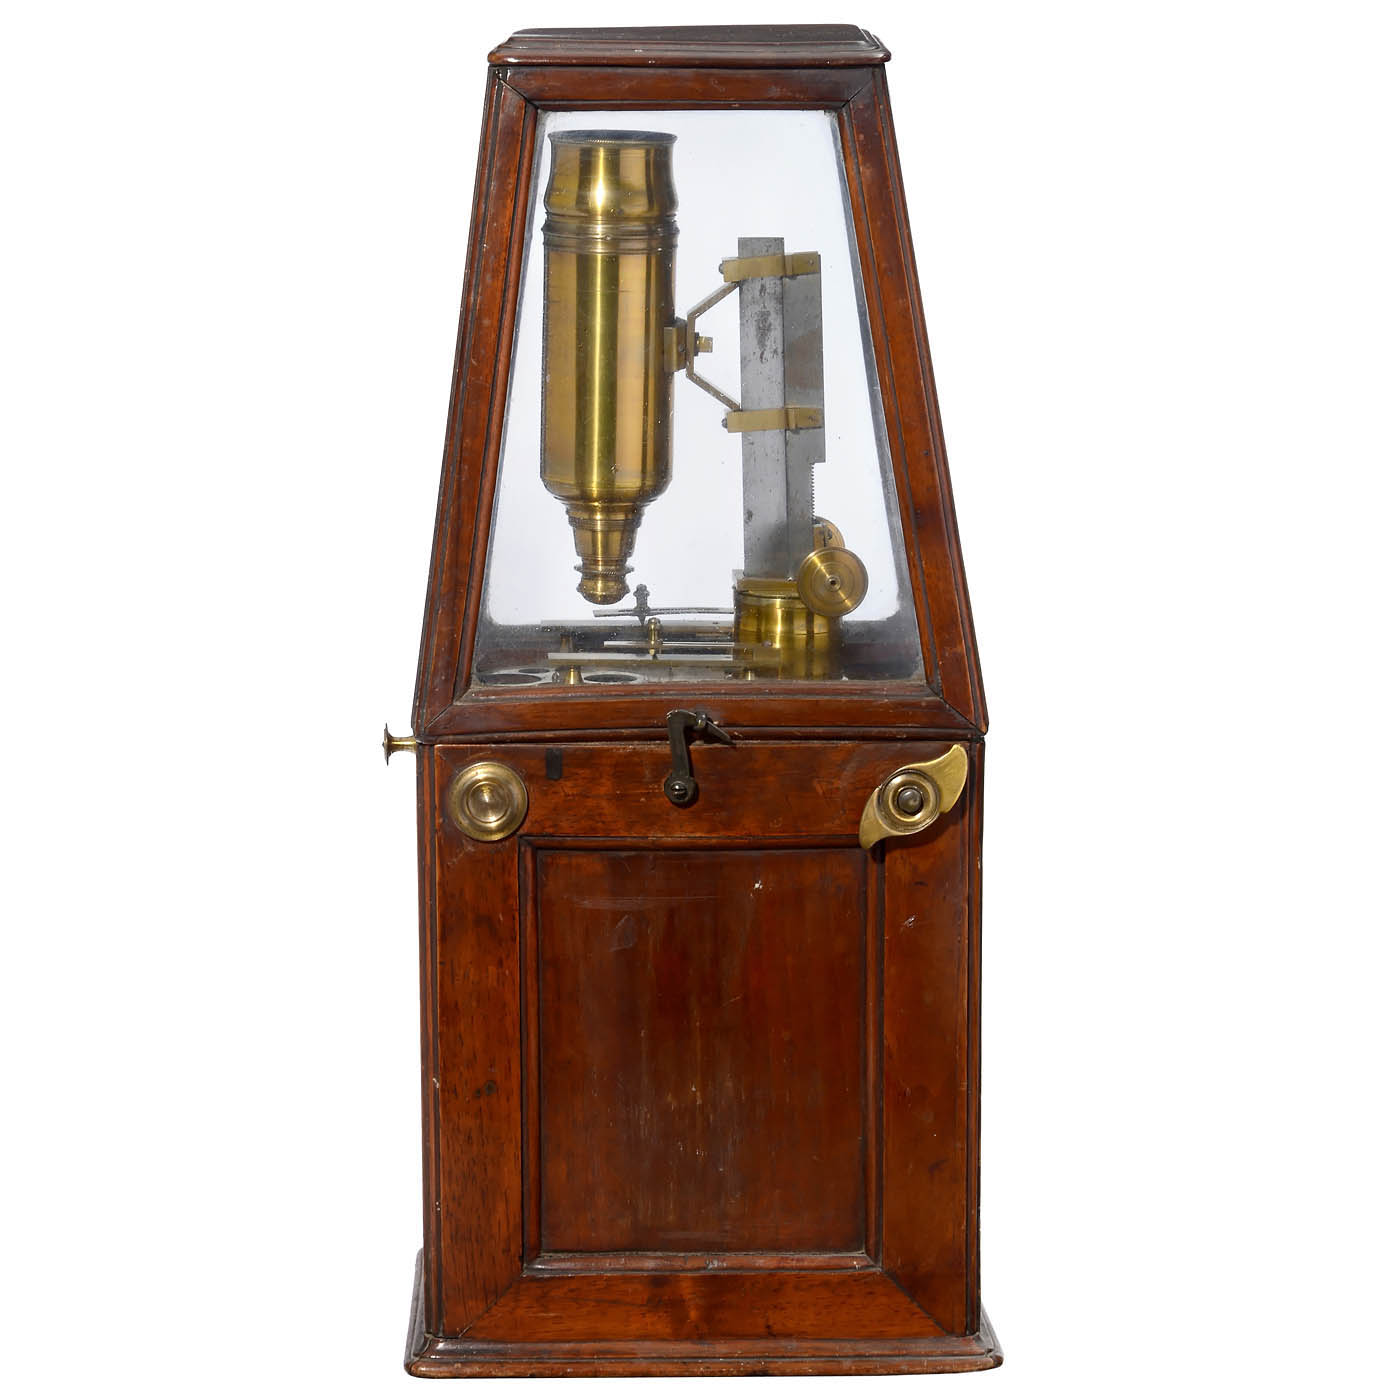 French Box Microscope, c. 1760 - Image 2 of 9